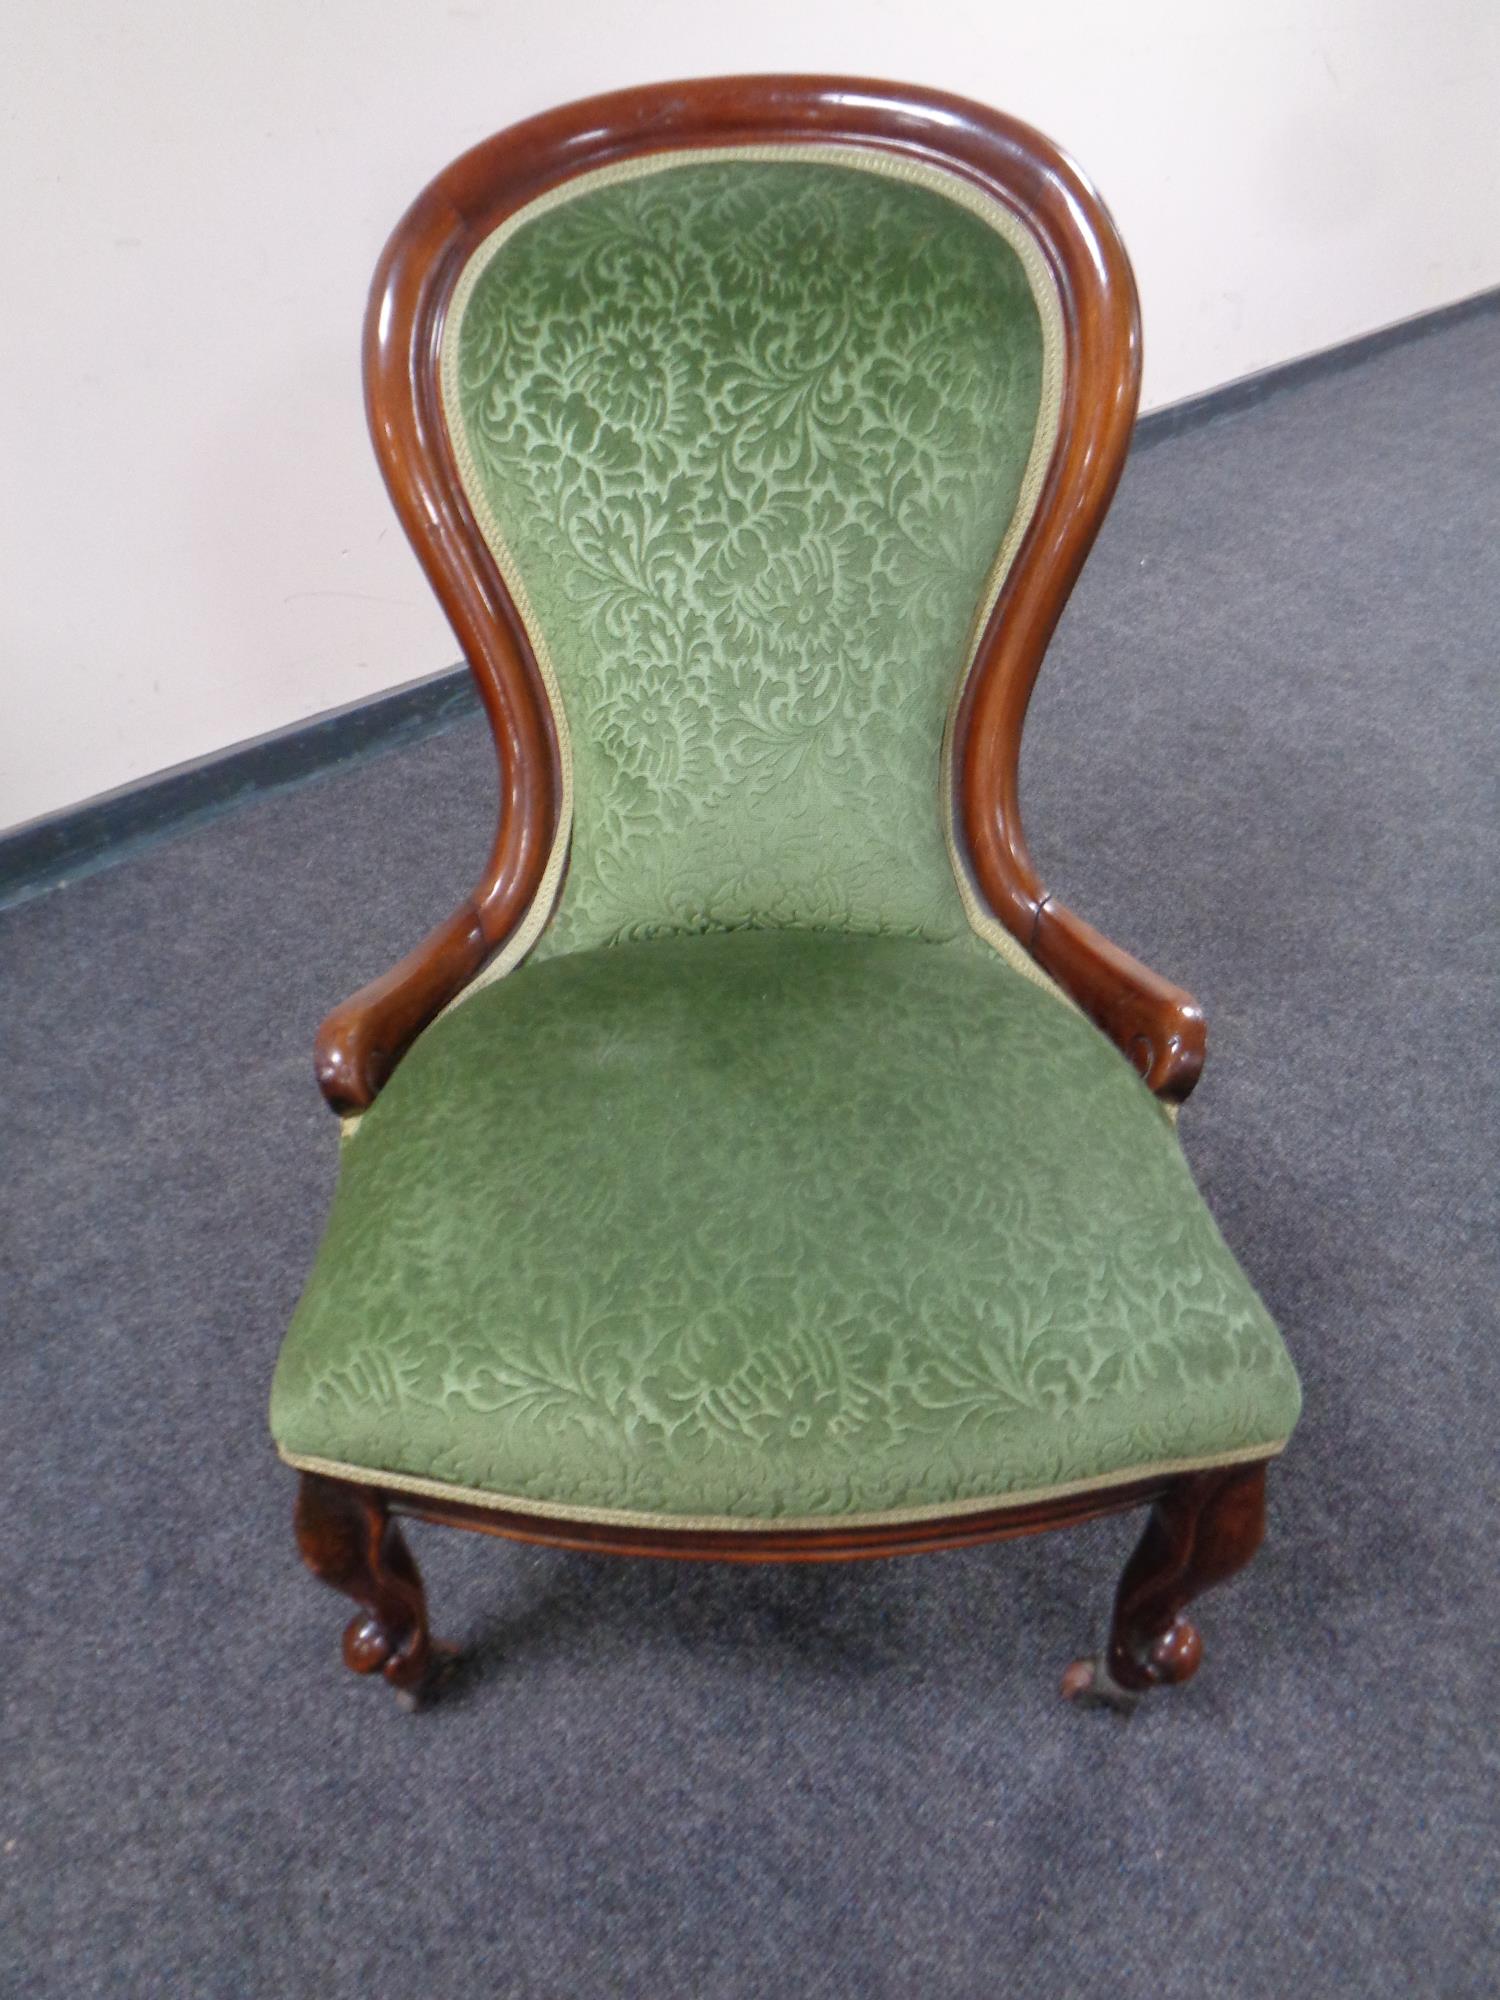 A Victorian mahogany nursing chair in green upholstery